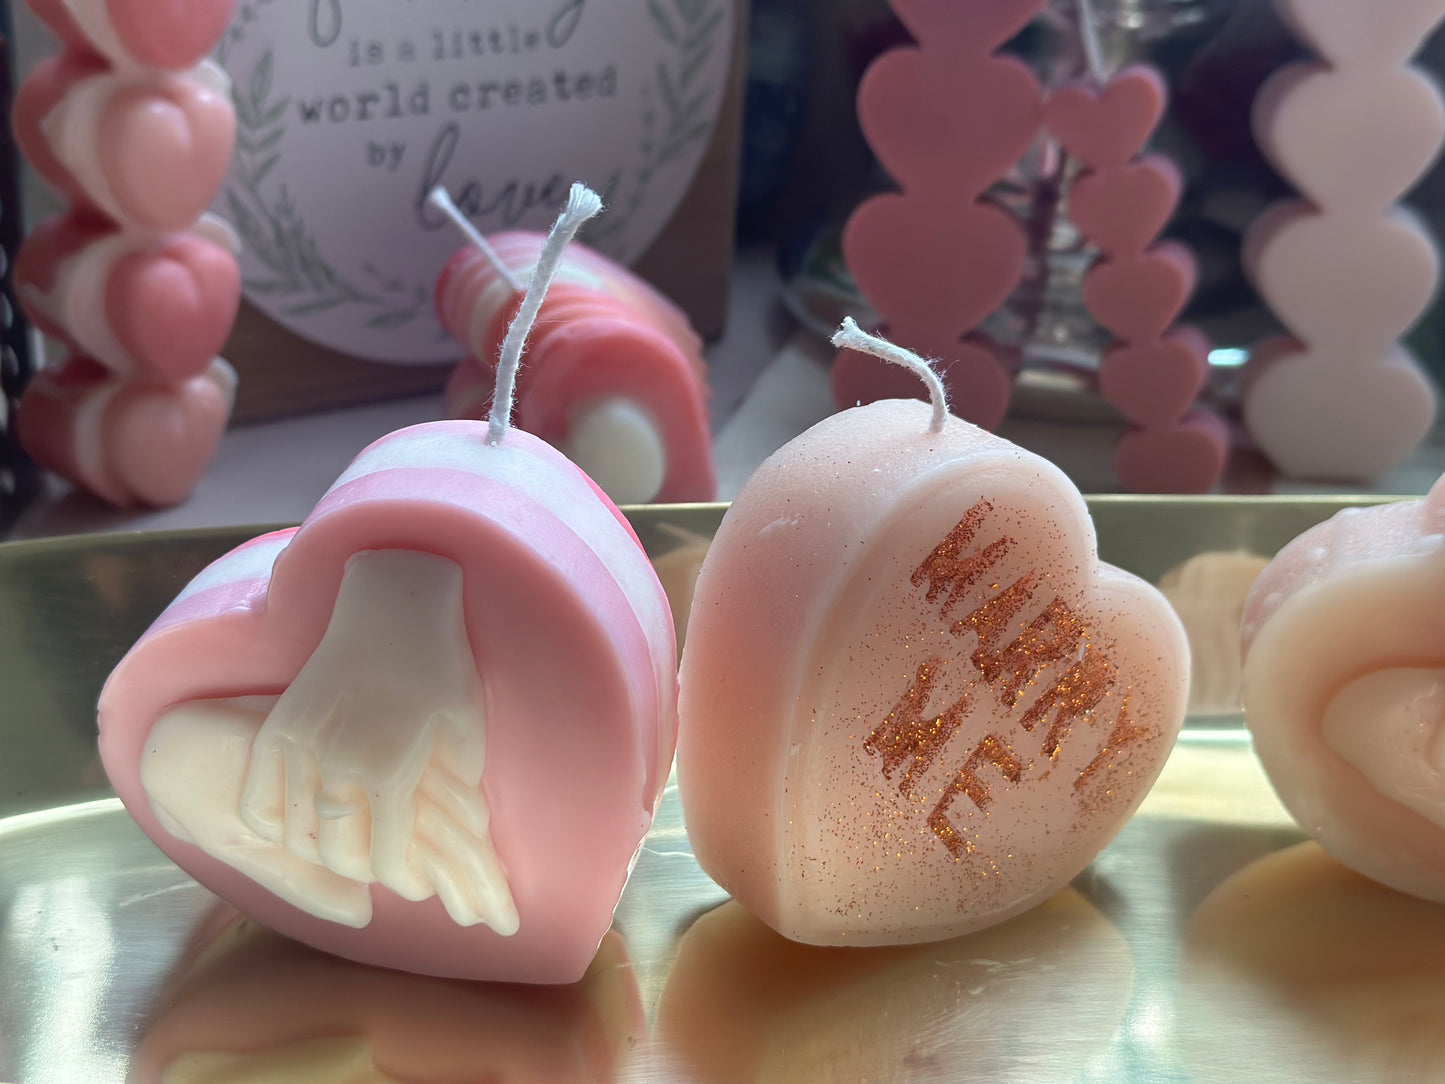 Valentines Heart Candle, 2 "Marry Me" Candle/Holding Hands Heart Candle, Home Decor, Love Candle, White Beeswax Candle